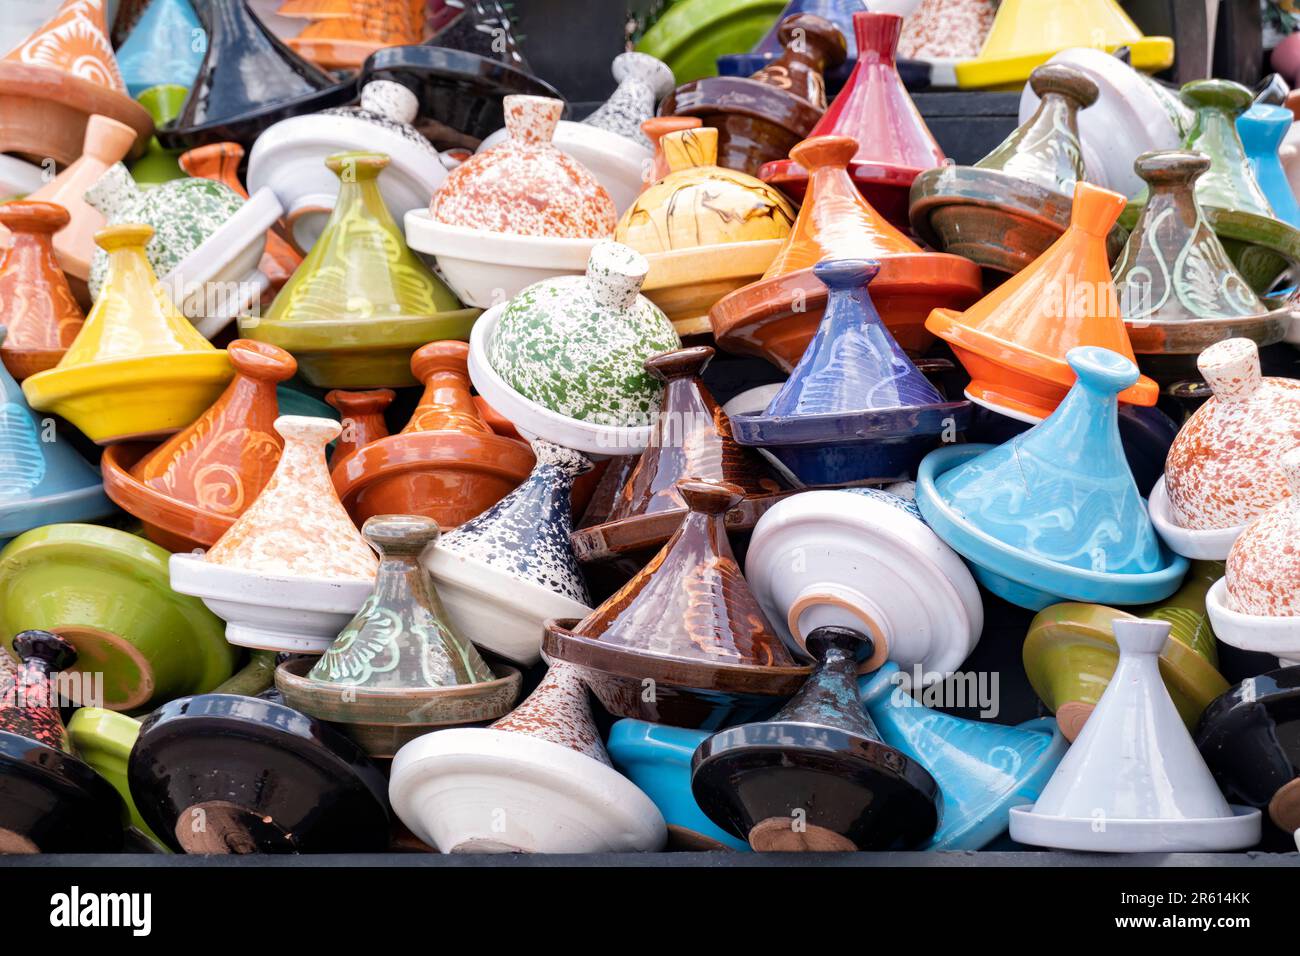 Assorted colourfully painted and glazed Moroccan tagines or tajines for sale in a souk or market in Morocco. the tagines are piled high on the stall Stock Photo